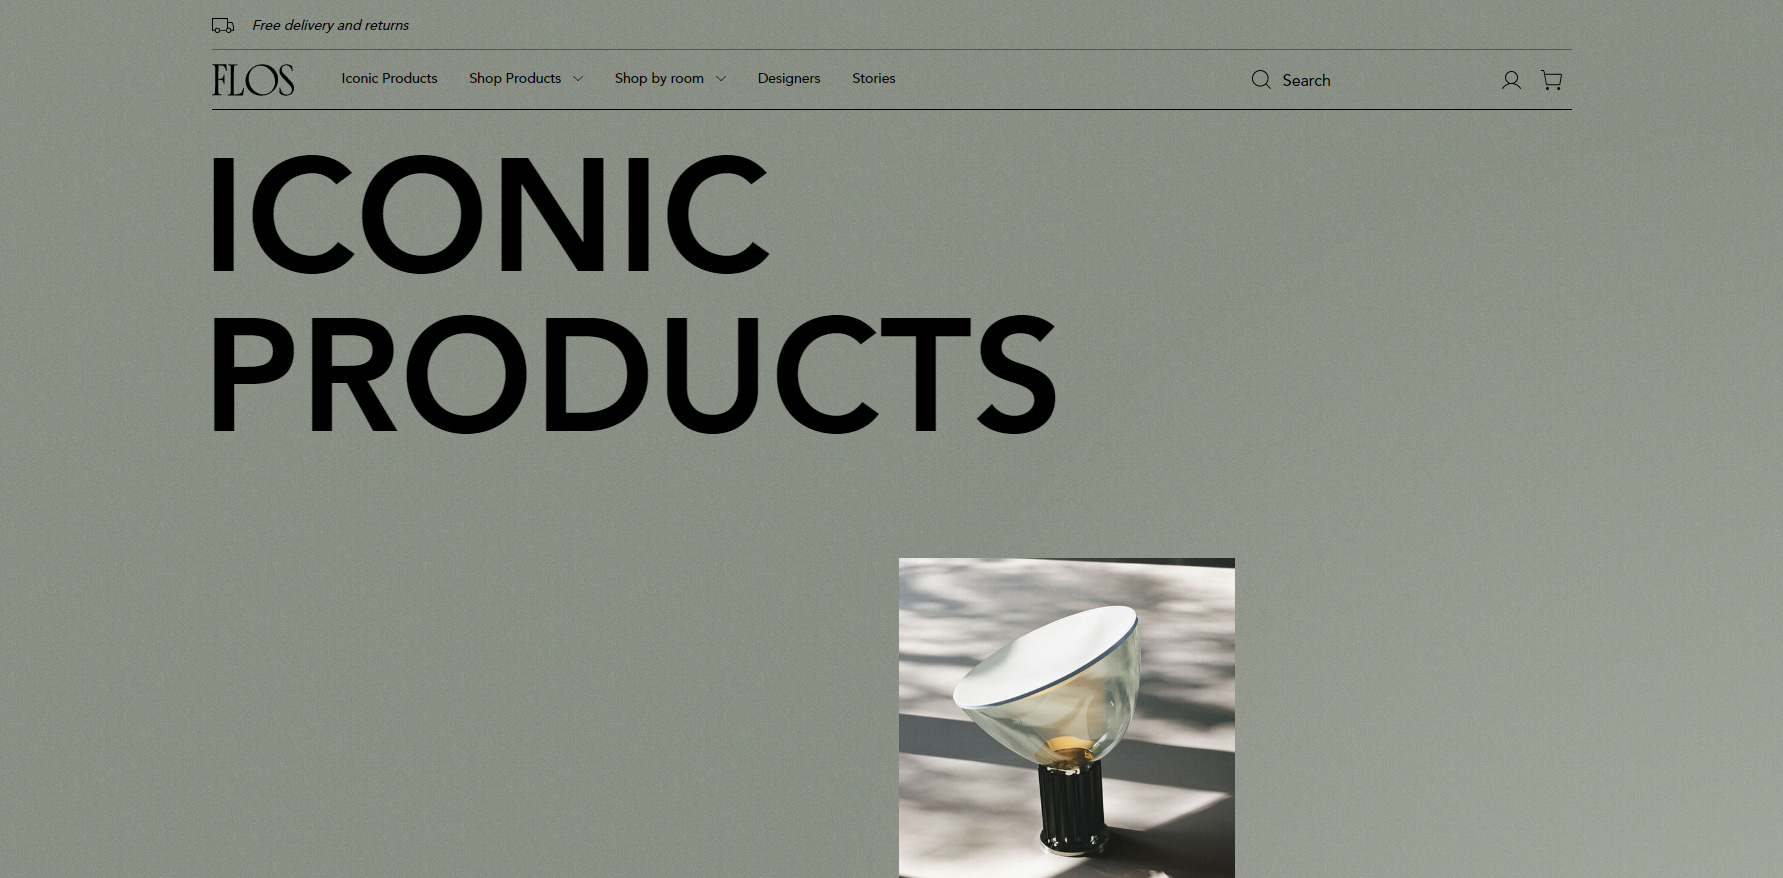 Flos official online store - Website of the Day